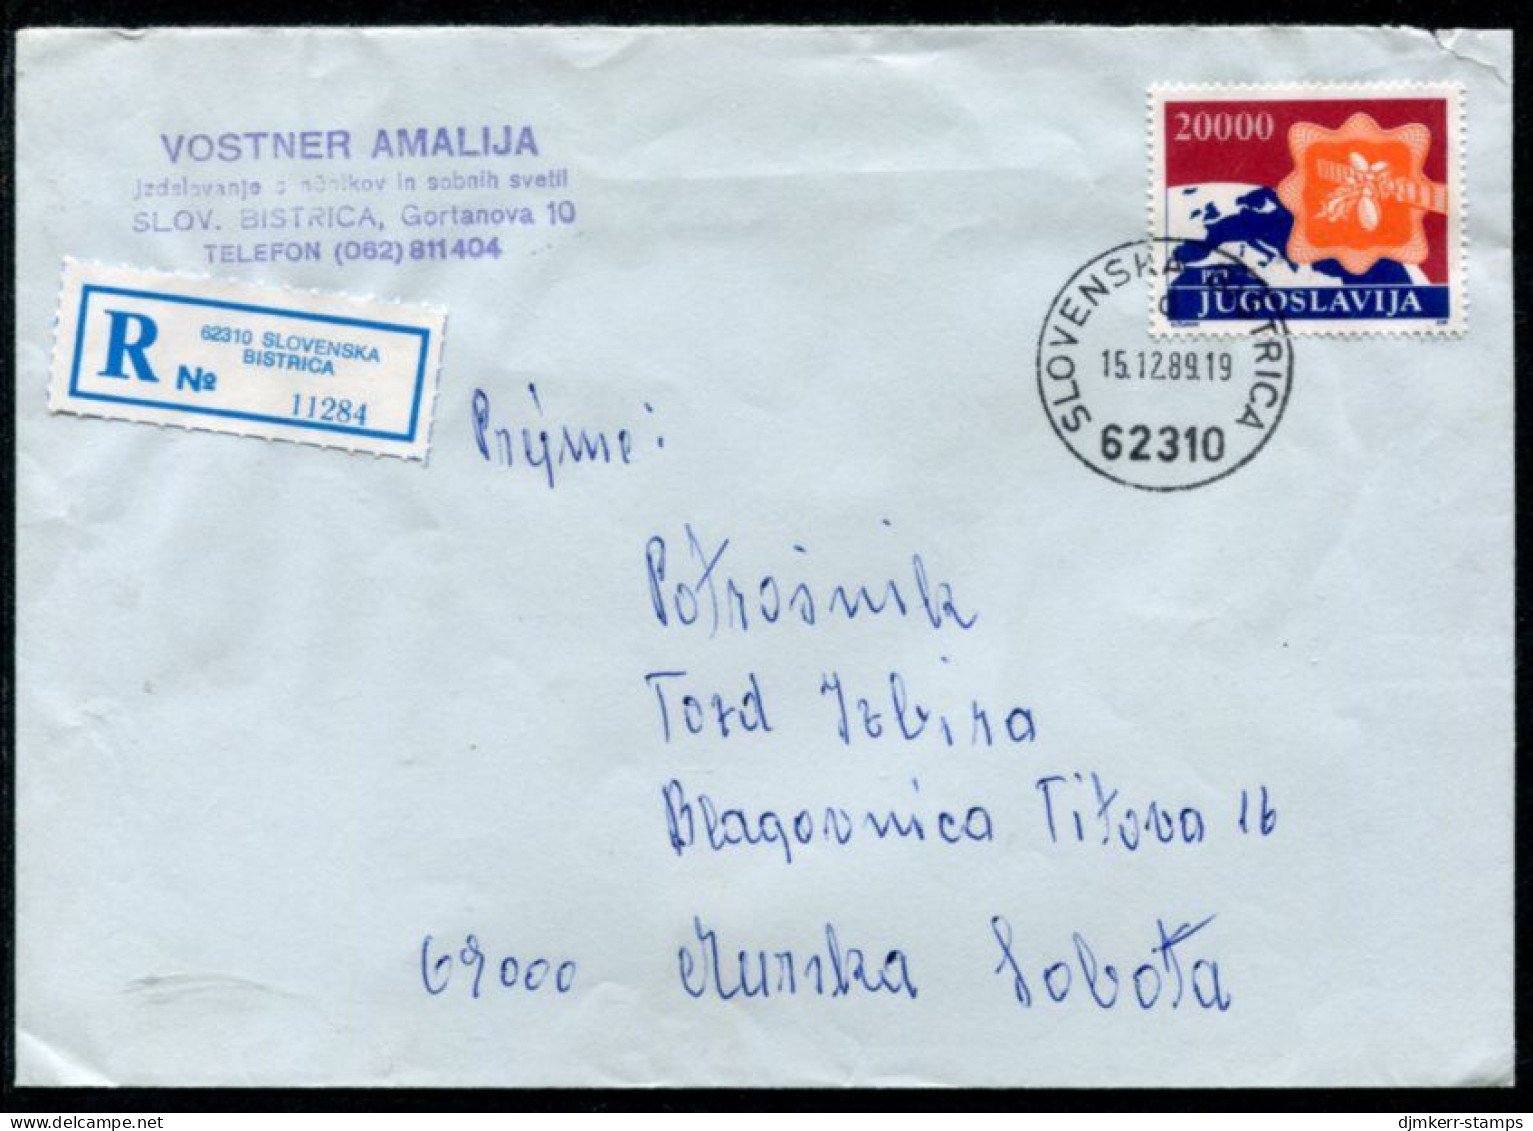 YUGOSLAVIA 1989 Registered Cover Franked With Postal Services 20000 D Single Franking    Michel 2362 - Lettres & Documents